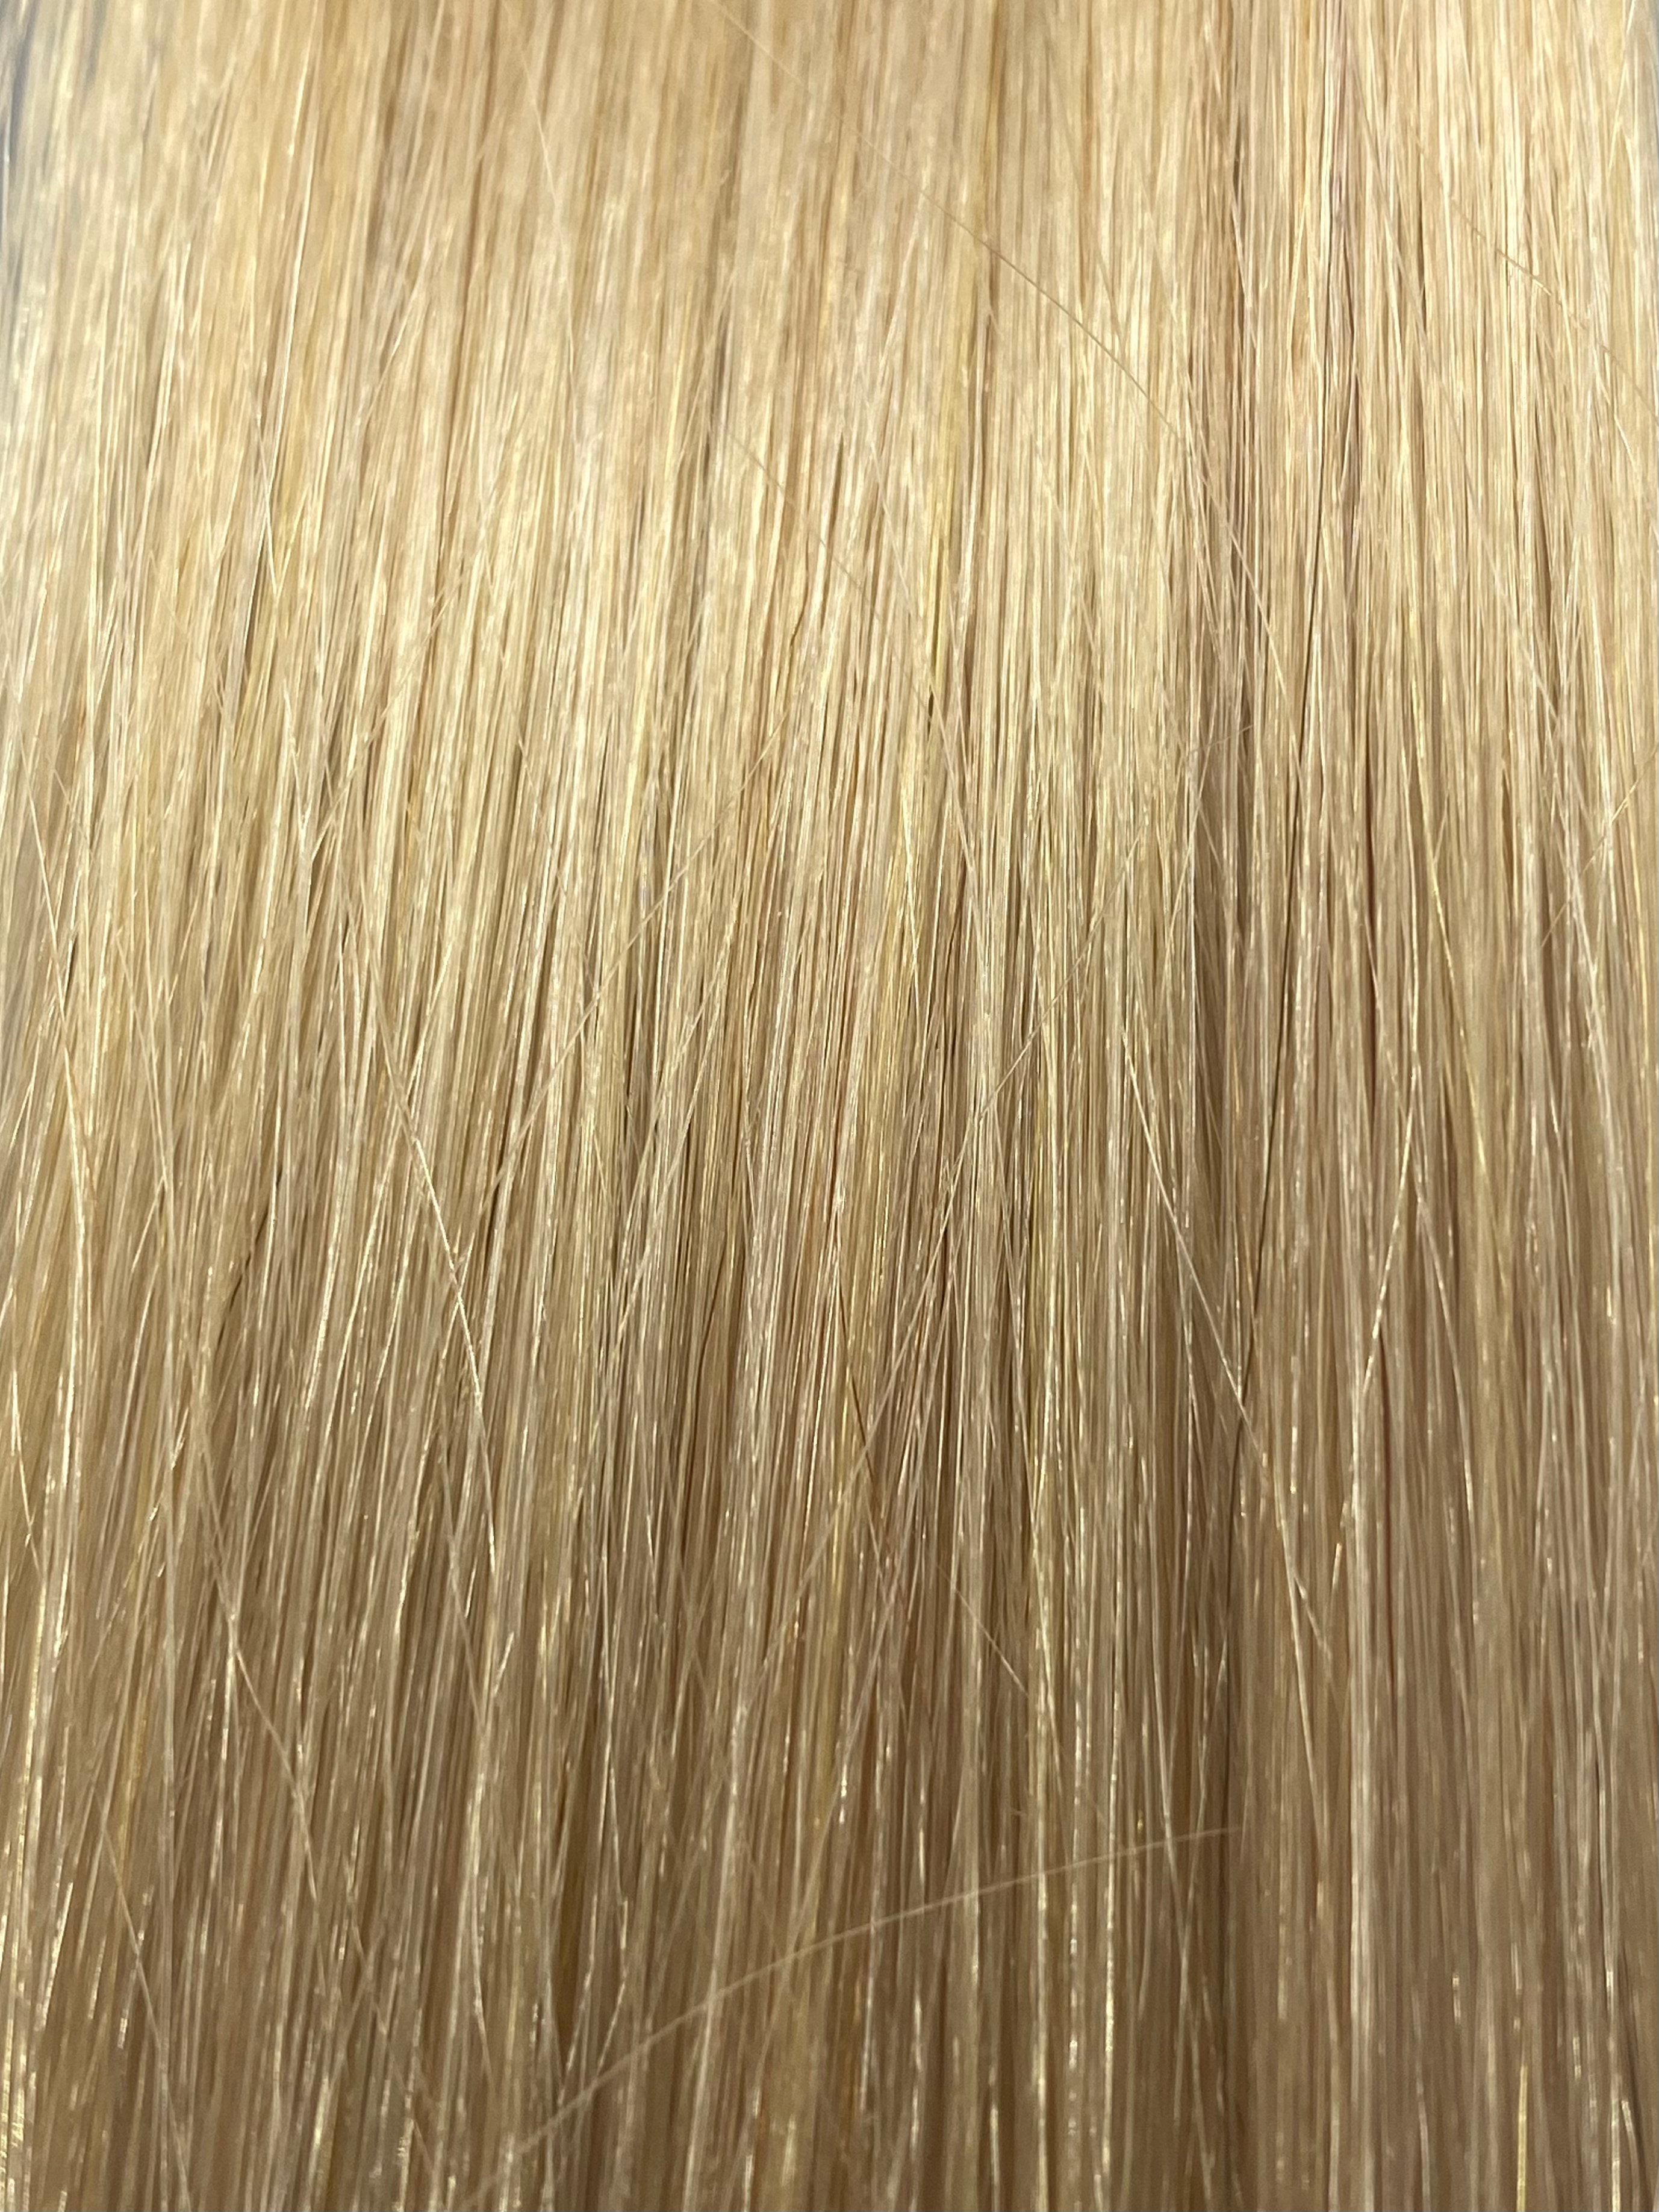 Tape #1002 - 50cm/ 20 Inches - Very Light Ash Blonde - 20 Grams